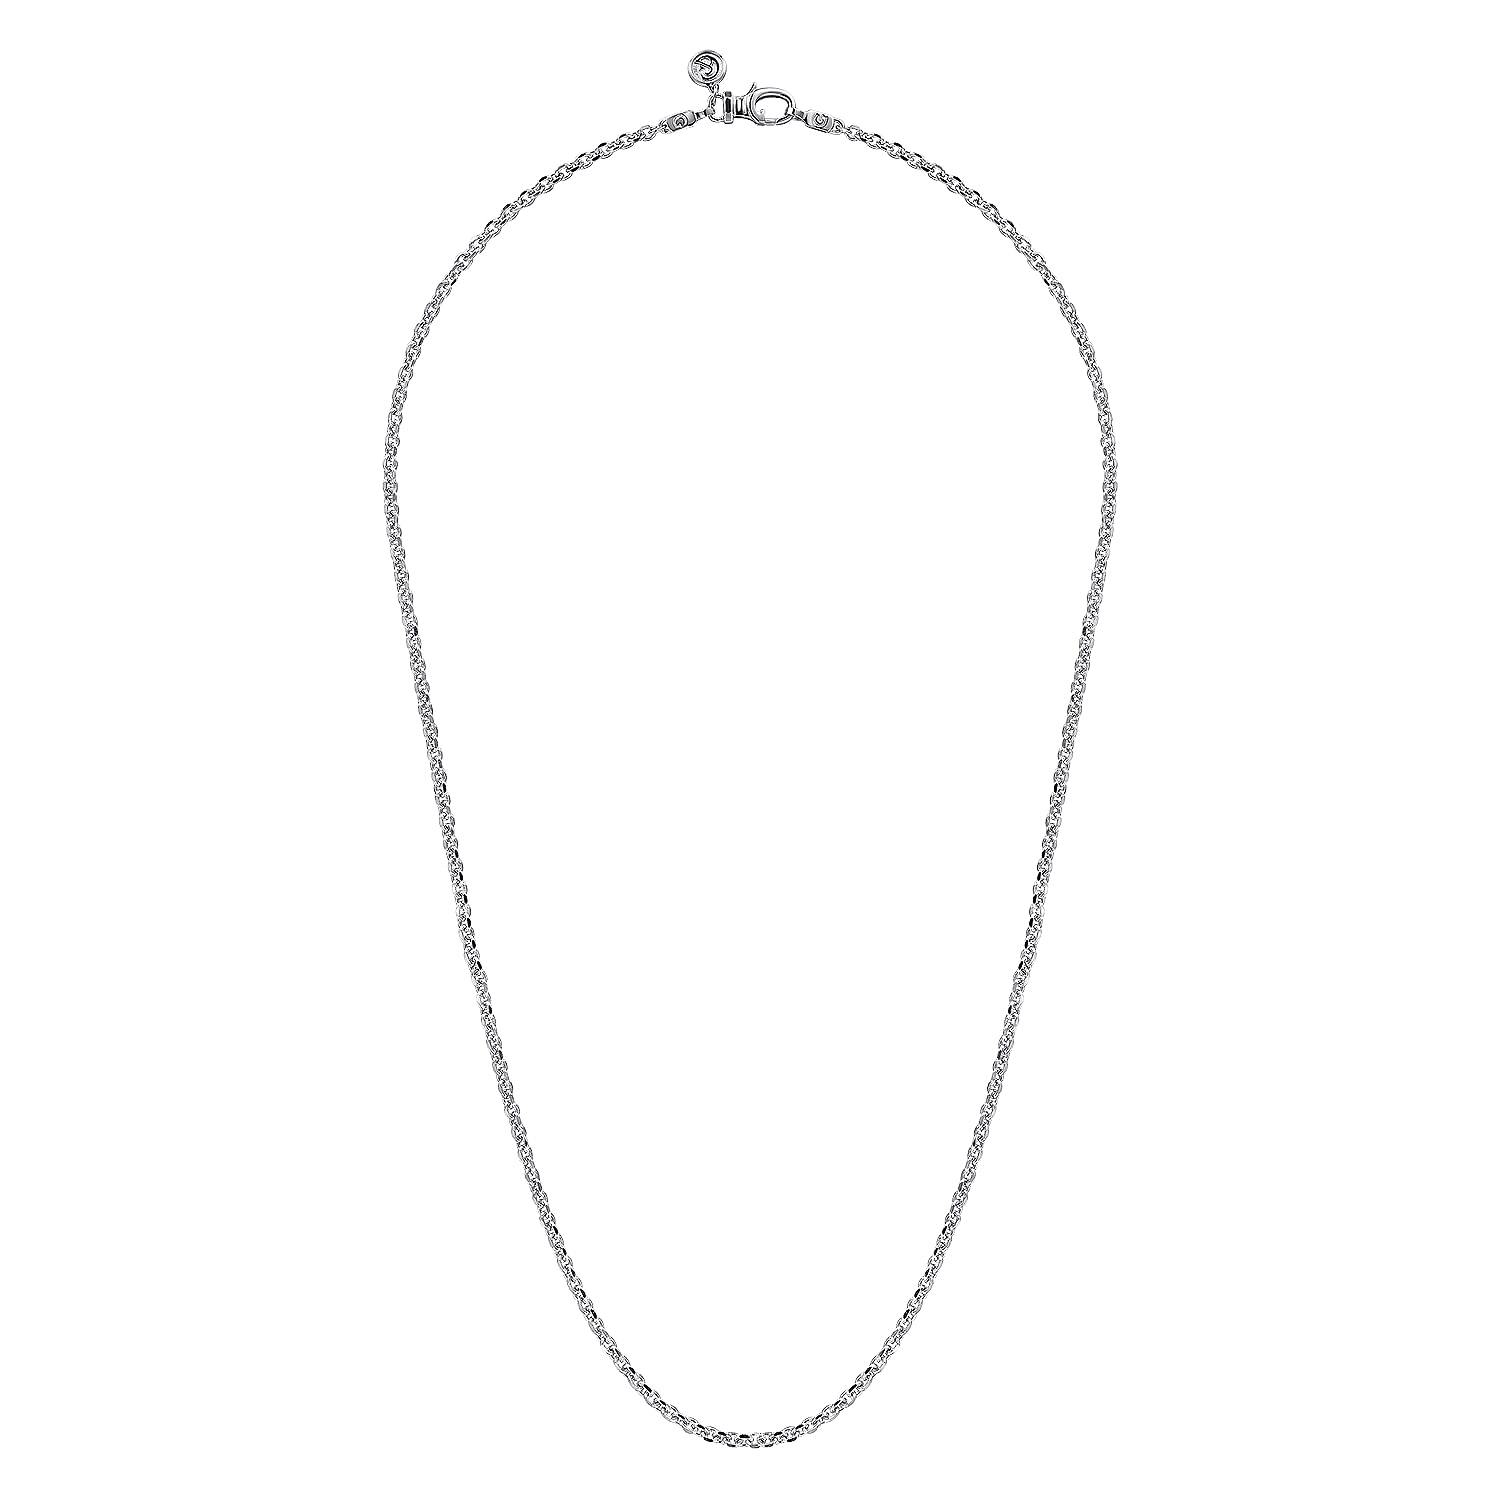 22 Inch 925 Sterling Silver Men's Link Chain Necklace